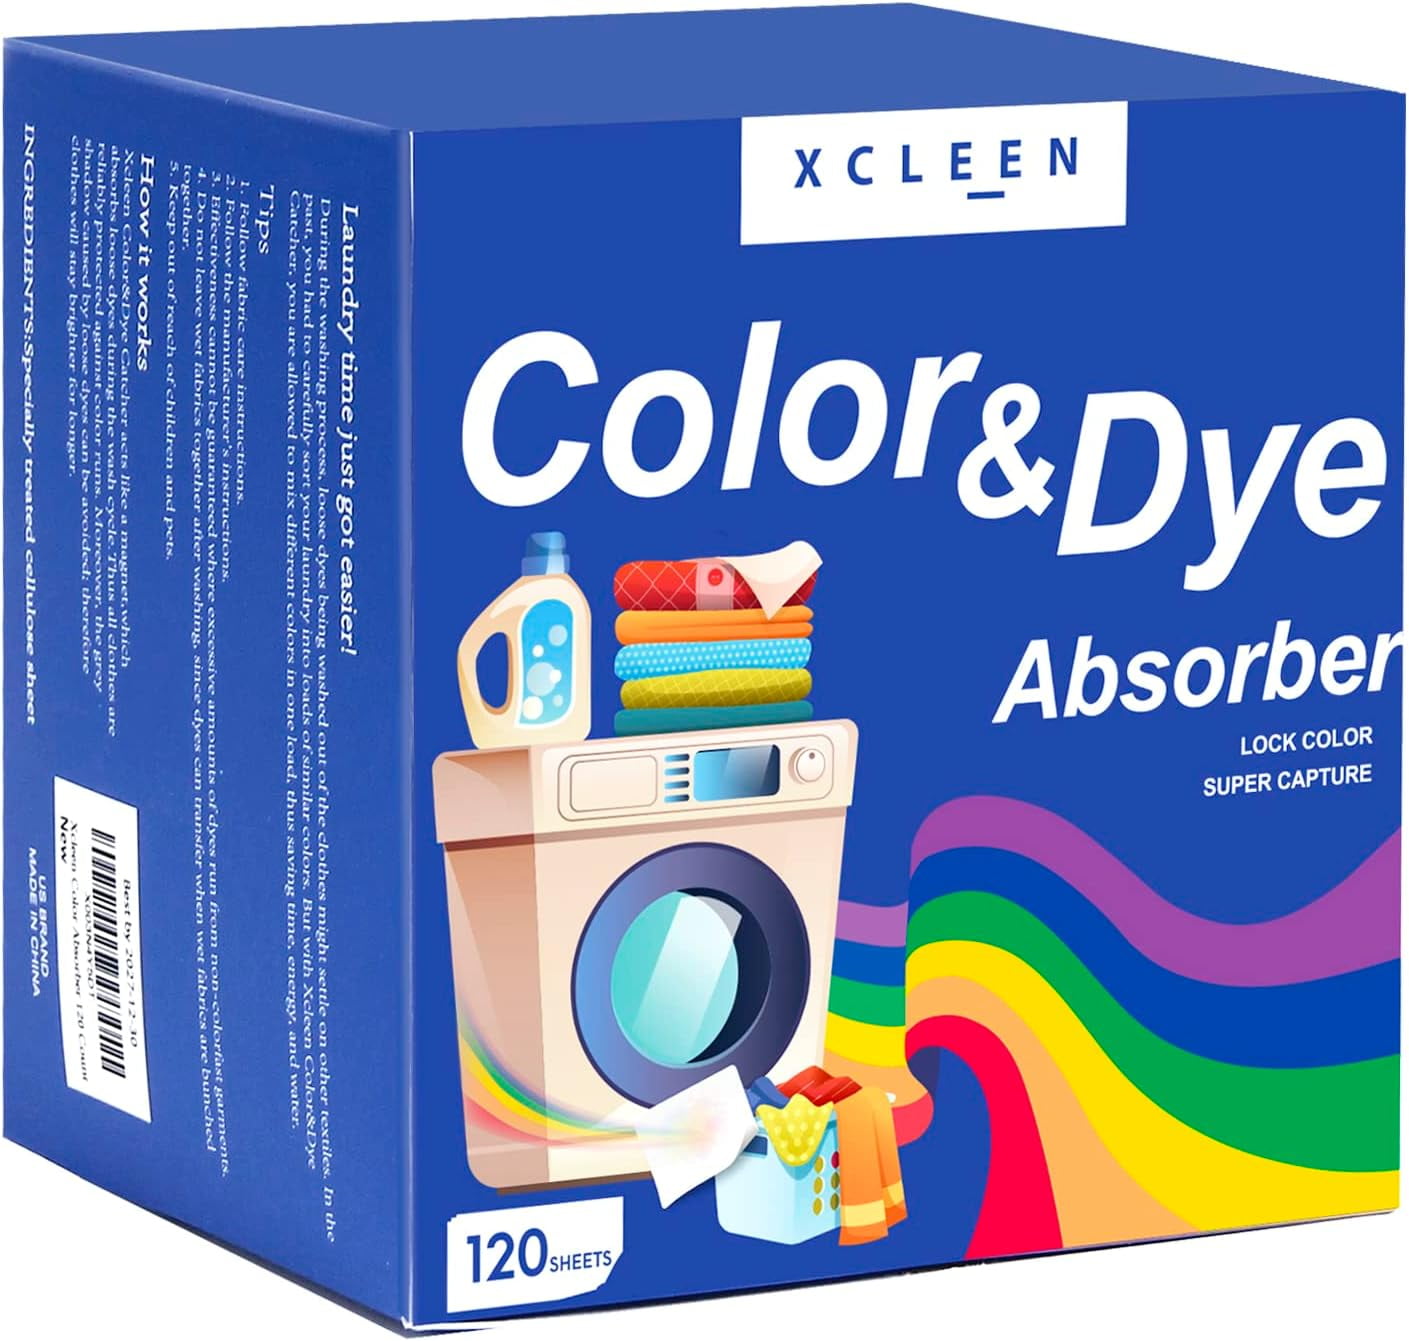 Shout Color Catcher Dye Trapping Sheets (72 ct)